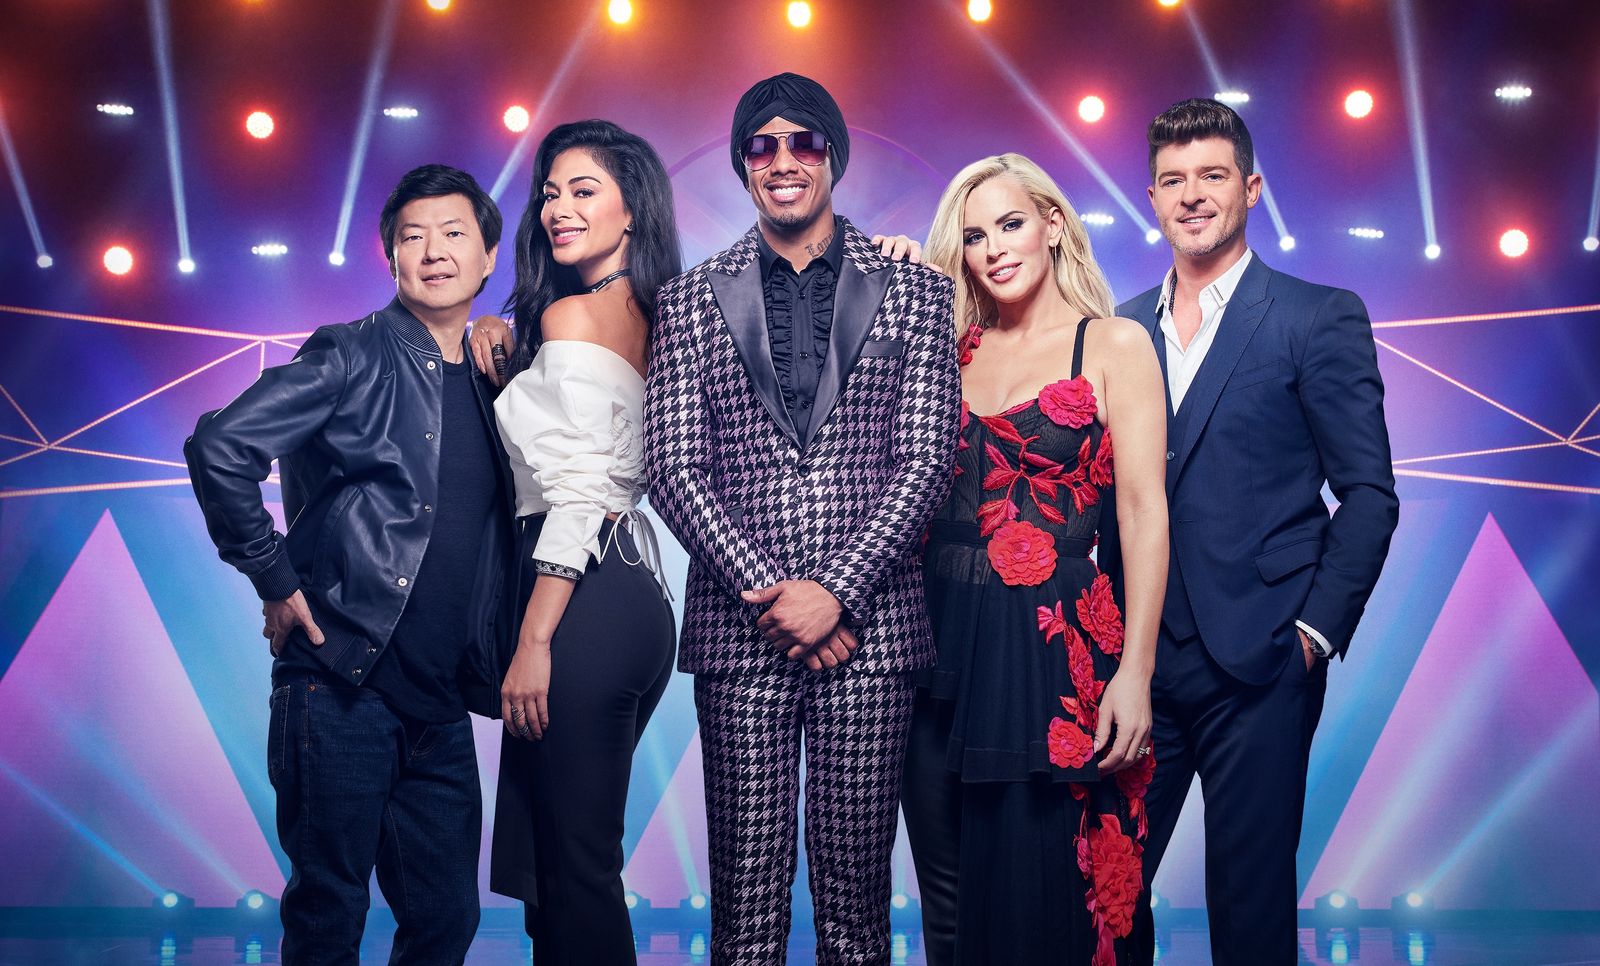 Ken Jeong, Nicole Scherzinger, Nick Cannon, Jenny McCarthy, and Robin Thicke in "The Masked Singer" on June 13, 2018 | Photo: FOX Image Collection/Getty Images